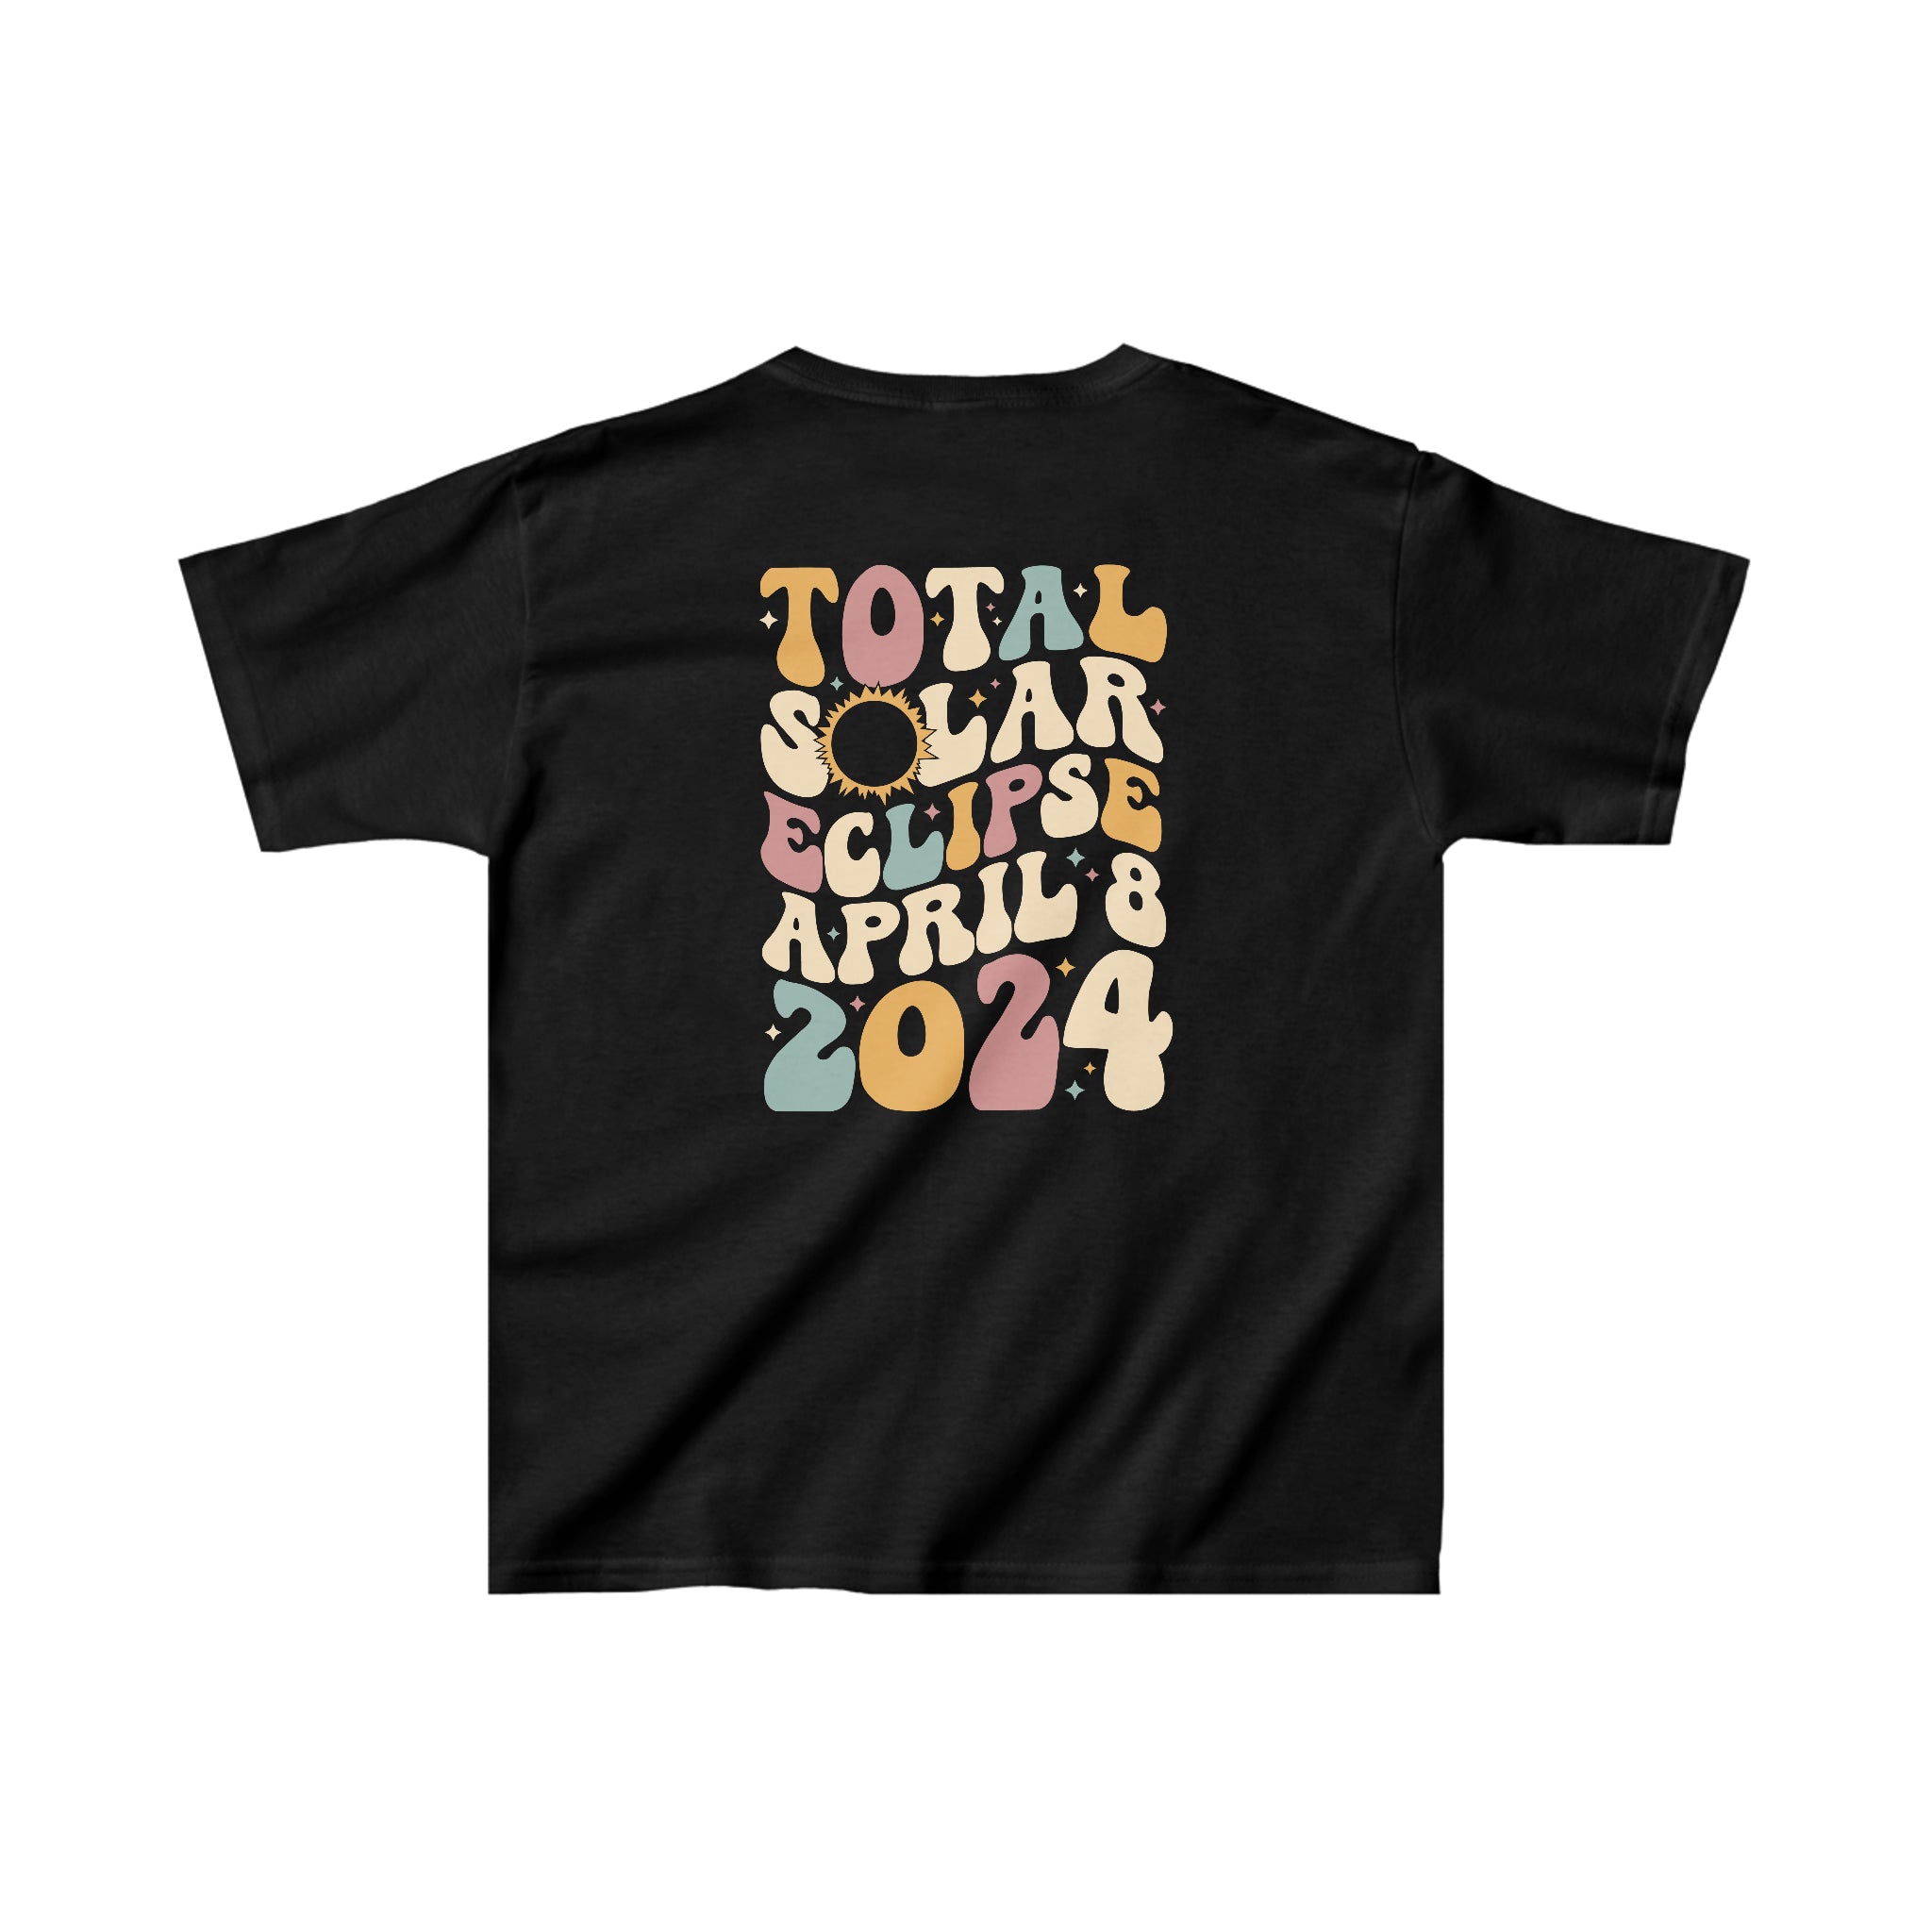 Solar Eclipse Retro Wave Youth Tee